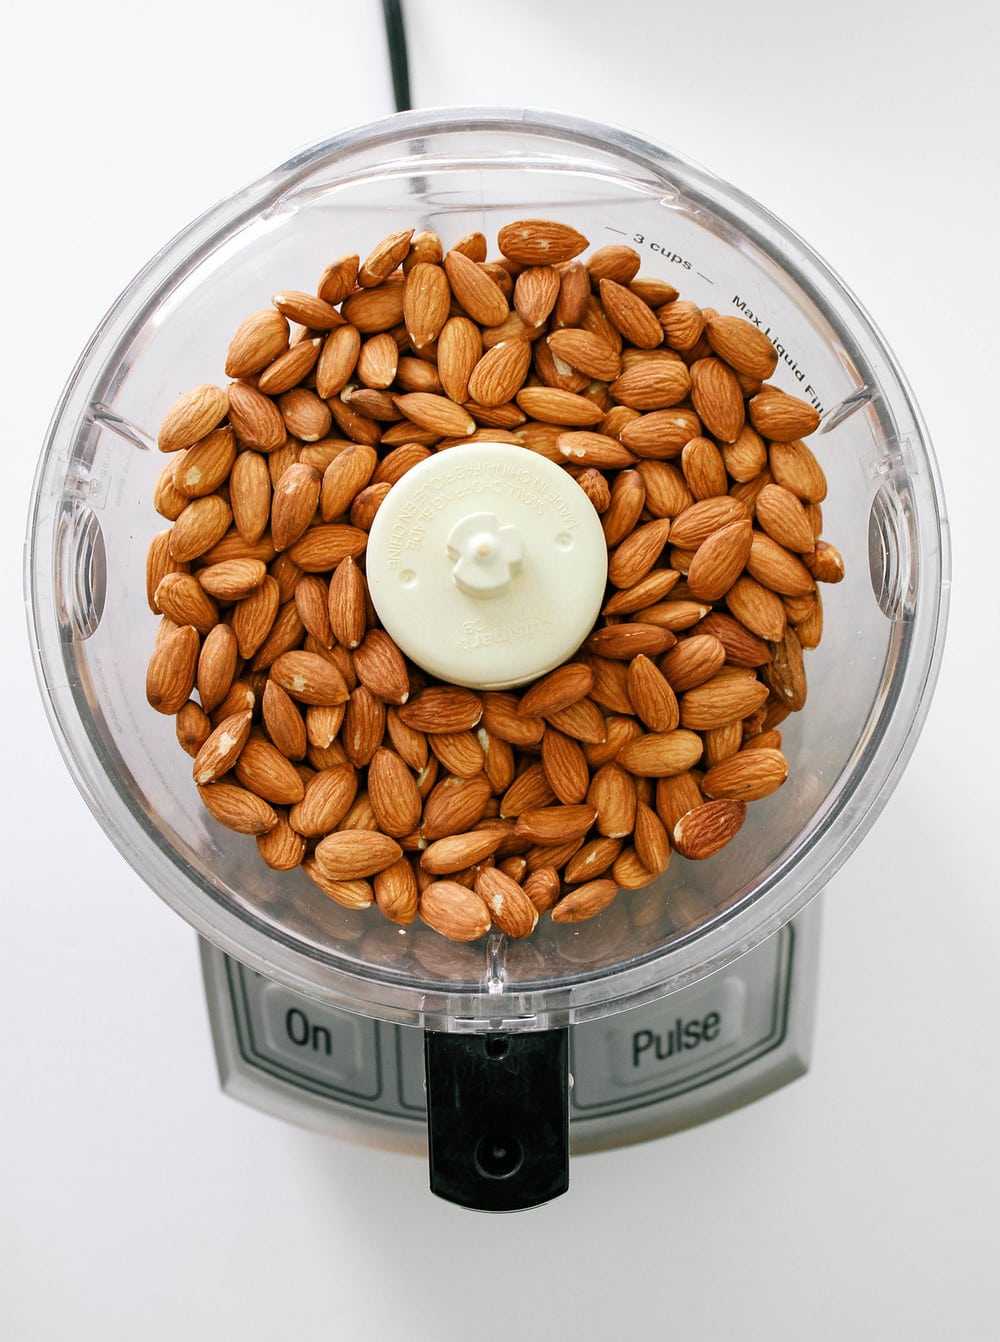 almond added to the bottom of a food processor before starting to blend